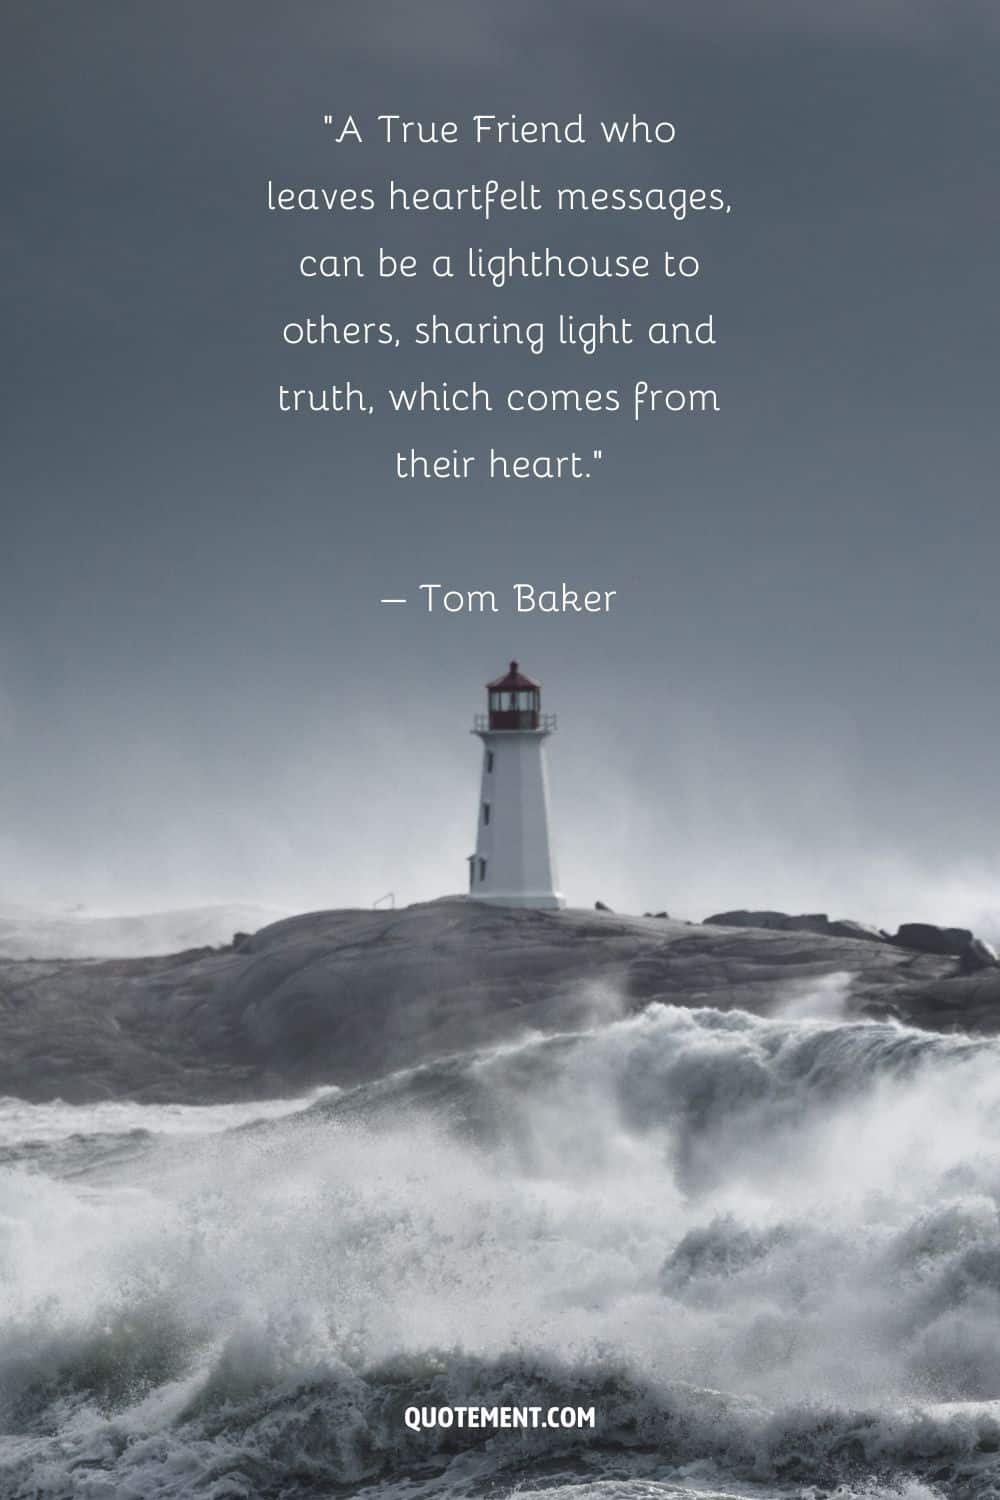 Fascinating quote by Tom Baker and a lighthouse in the background